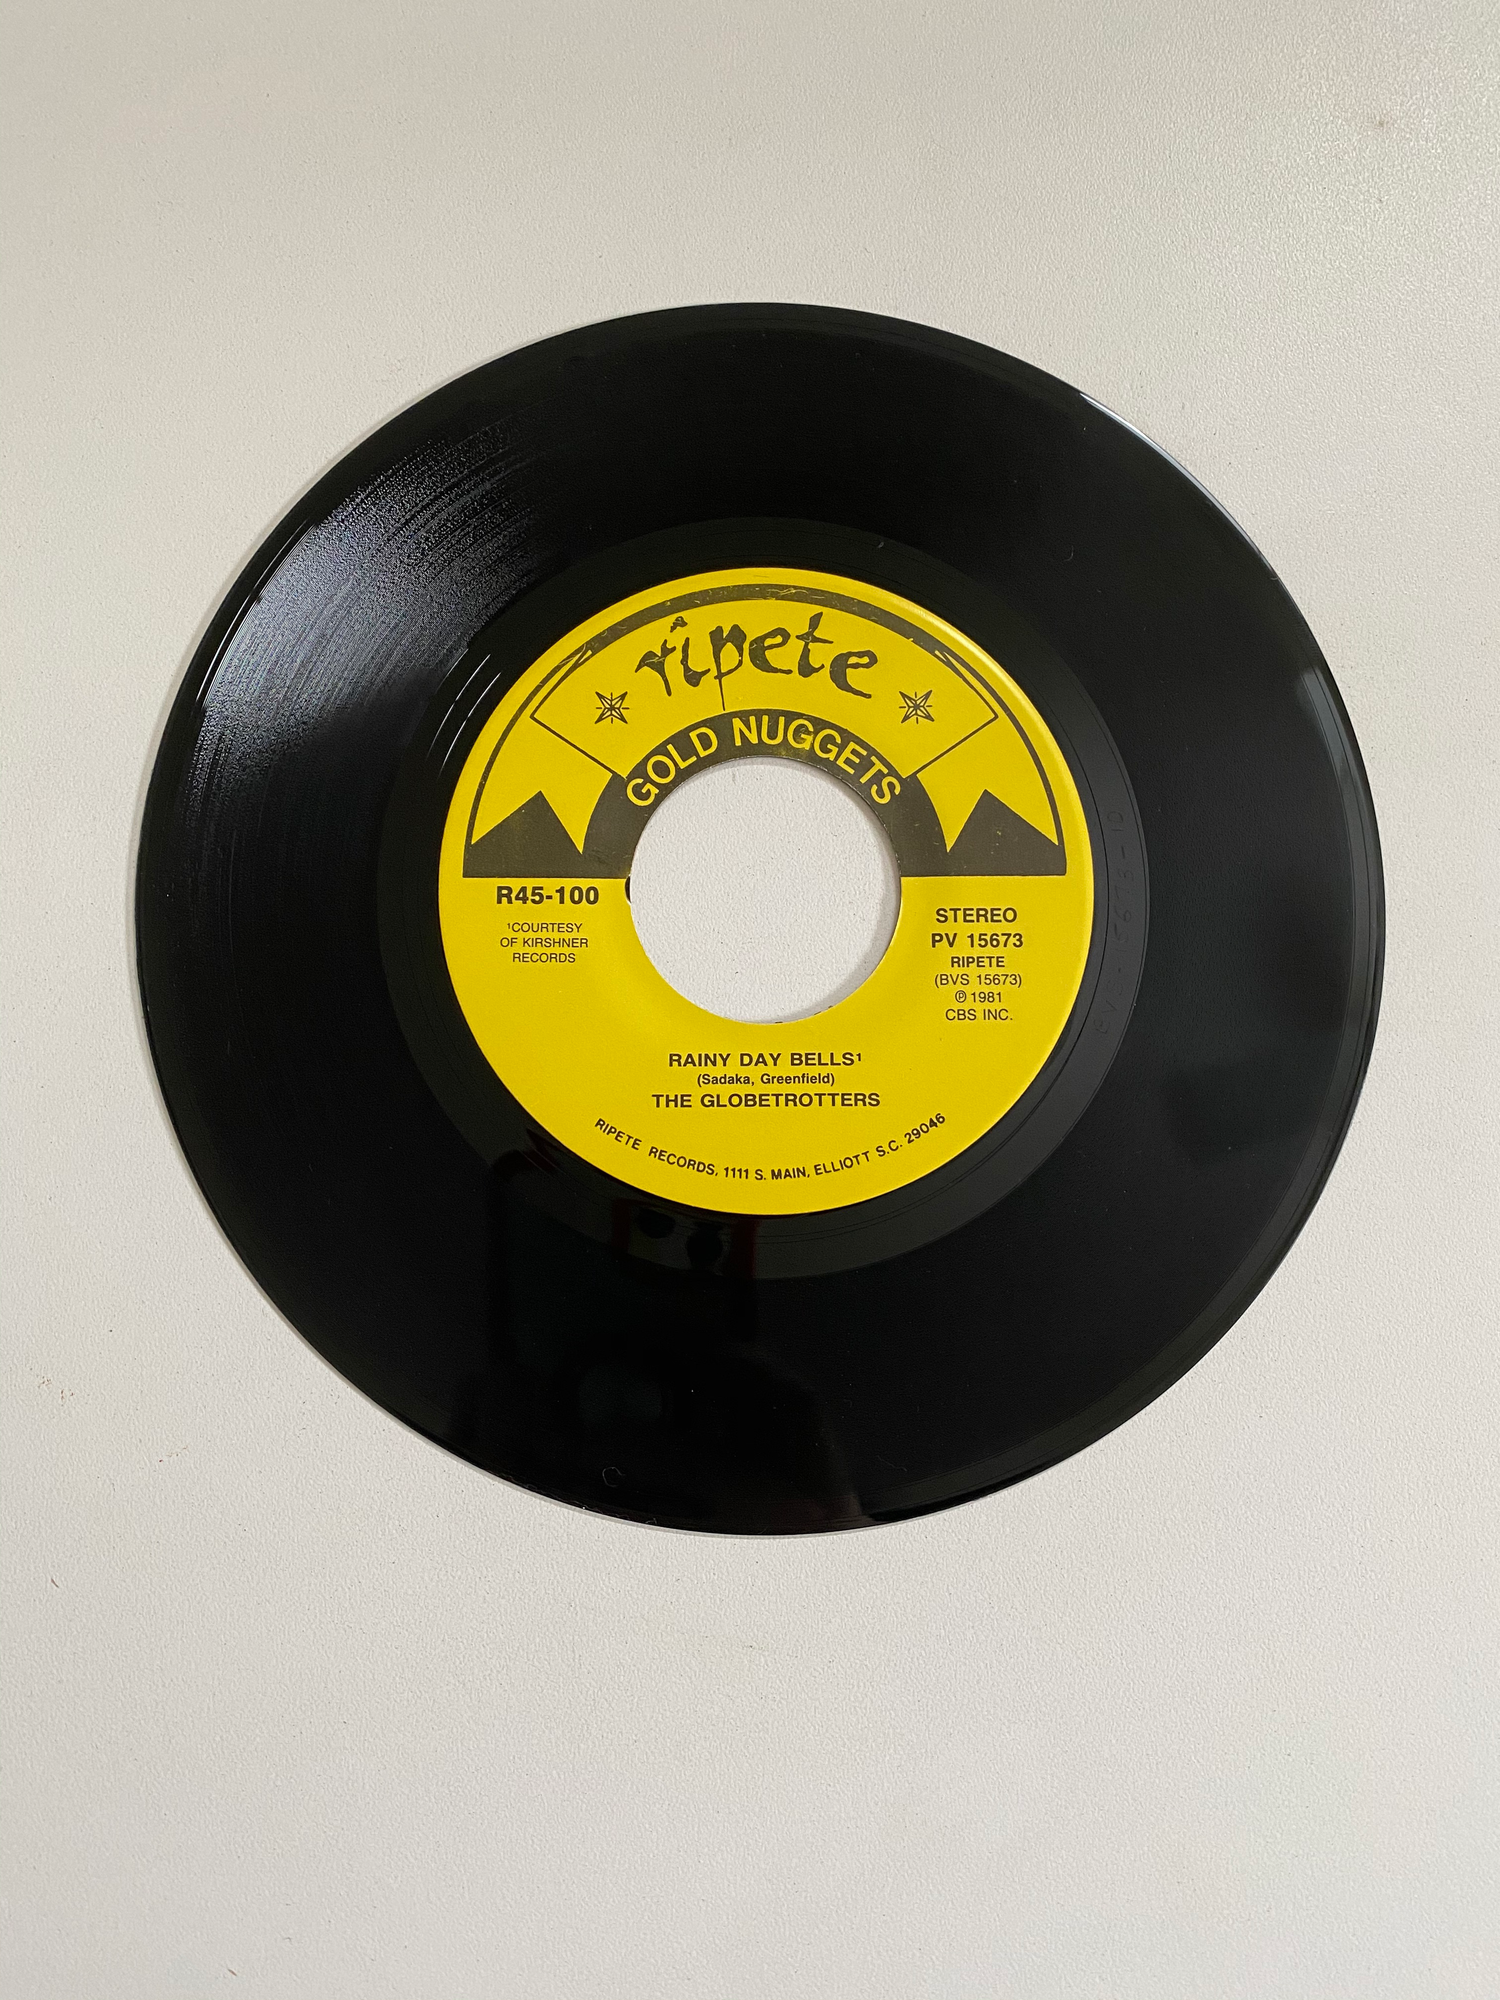 Robert John - If You Don't Want My Love | 45 The Vintedge Co.